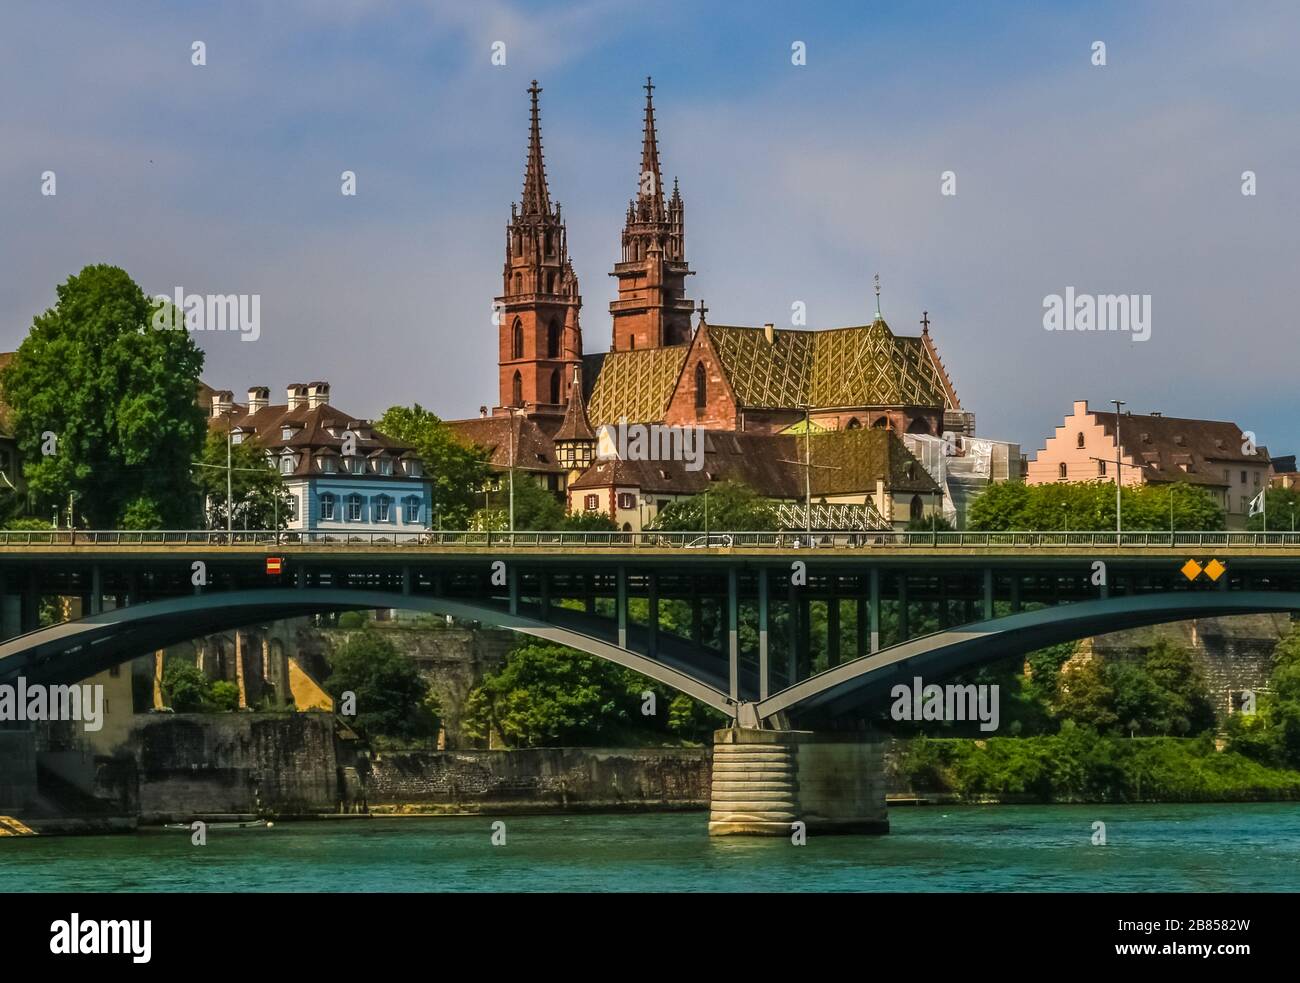 Lovely view of the Basler Münster cathedral and the bridge Wettsteinbrücke from the Rhine river. With its red sandstone walls, colourful roof tiles... Stock Photo